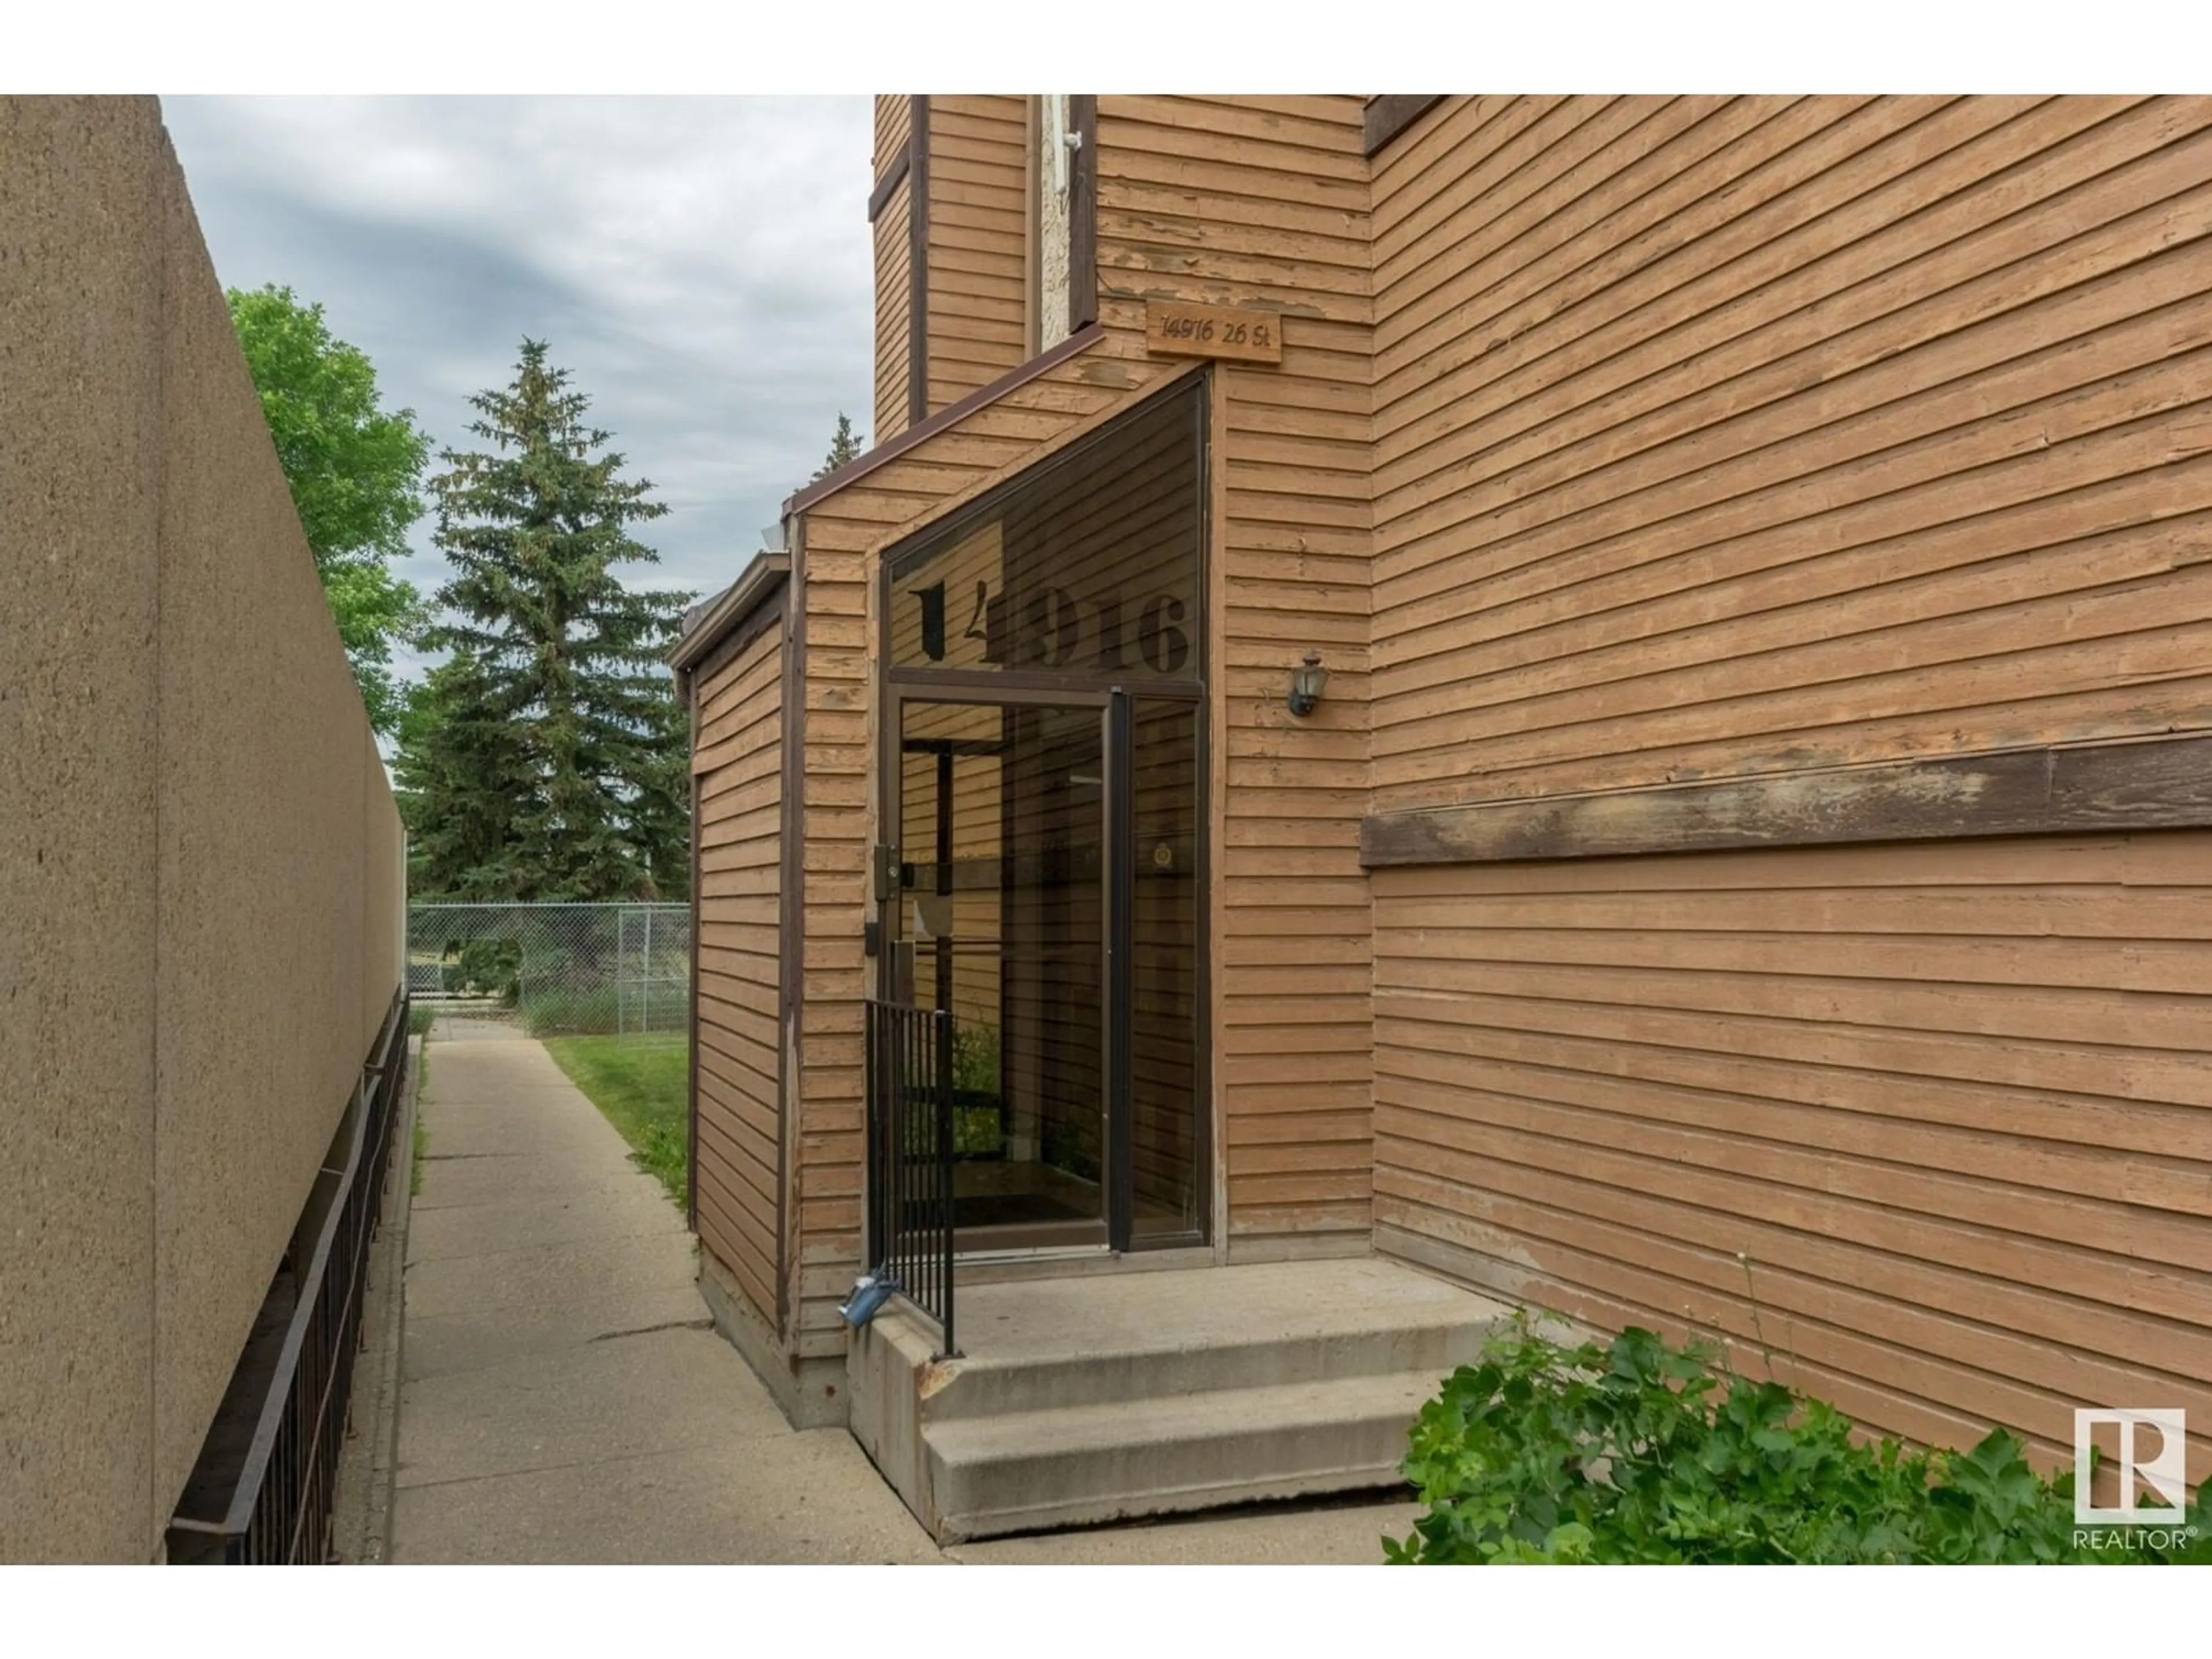 A pic from exterior of the house or condo for #406 14916 26 ST NW, Edmonton Alberta T5Y2G4